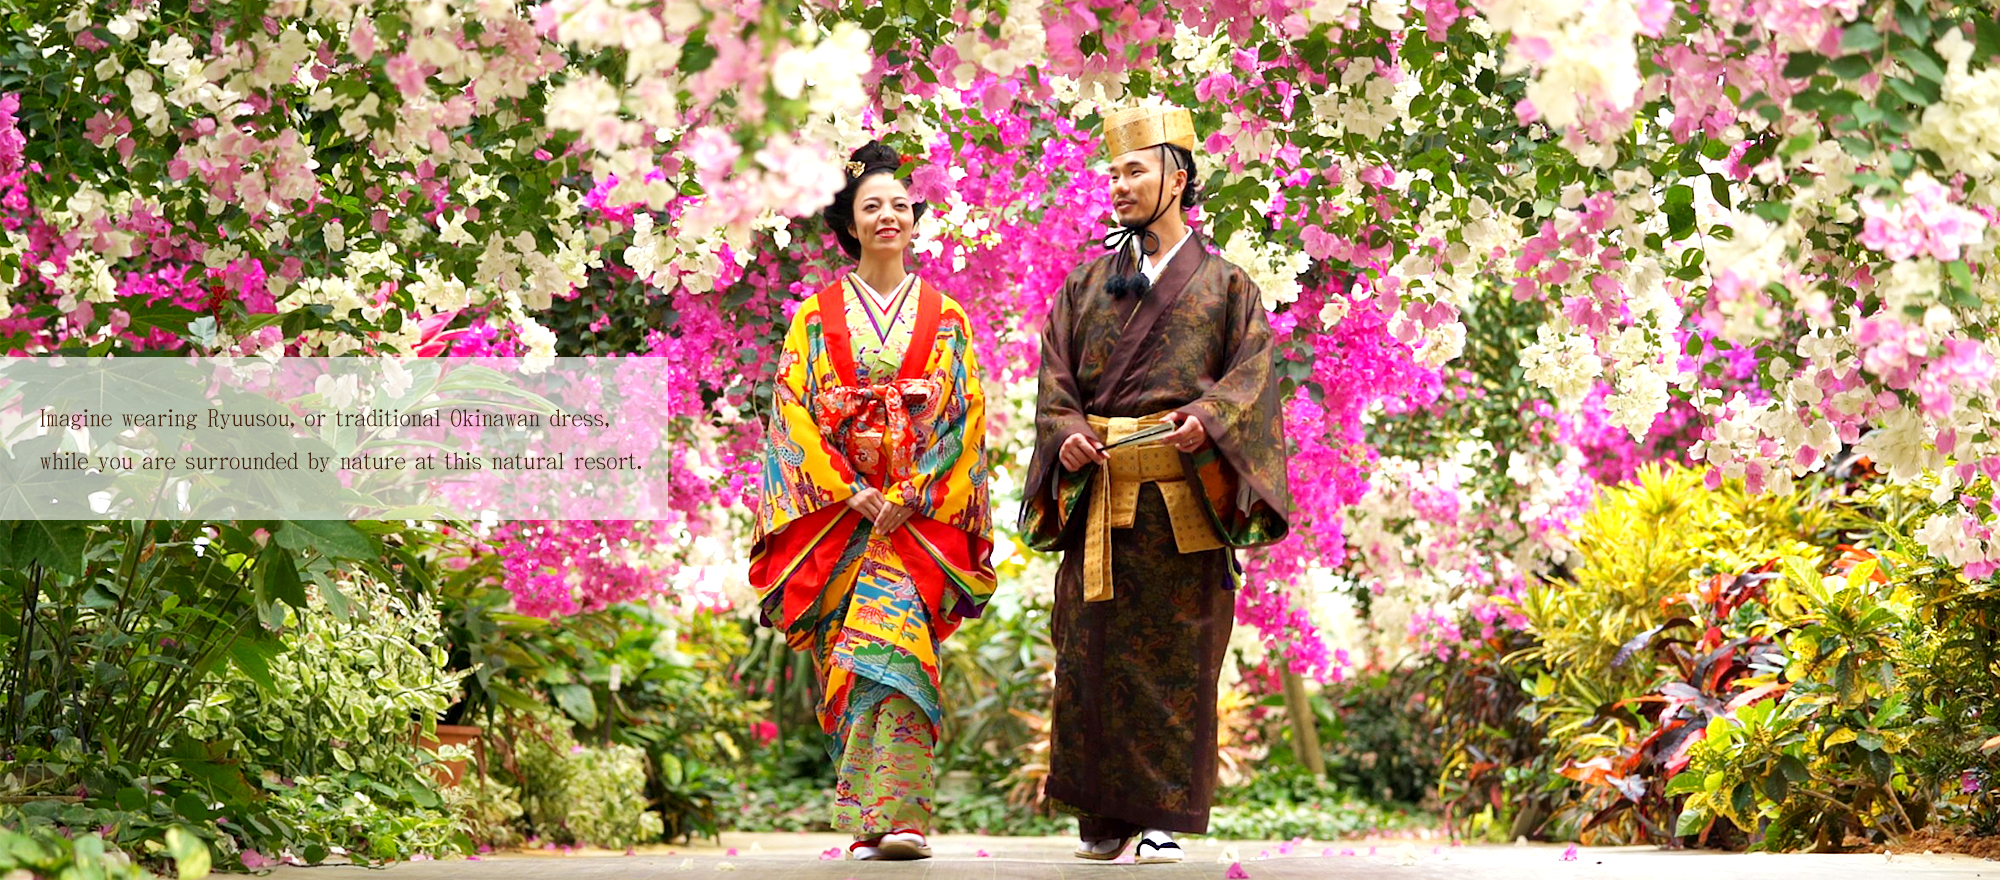 Imagine wearing Ryuusou, or traditional Okinawan dress, while you are surrounded by nature at this natural resort.